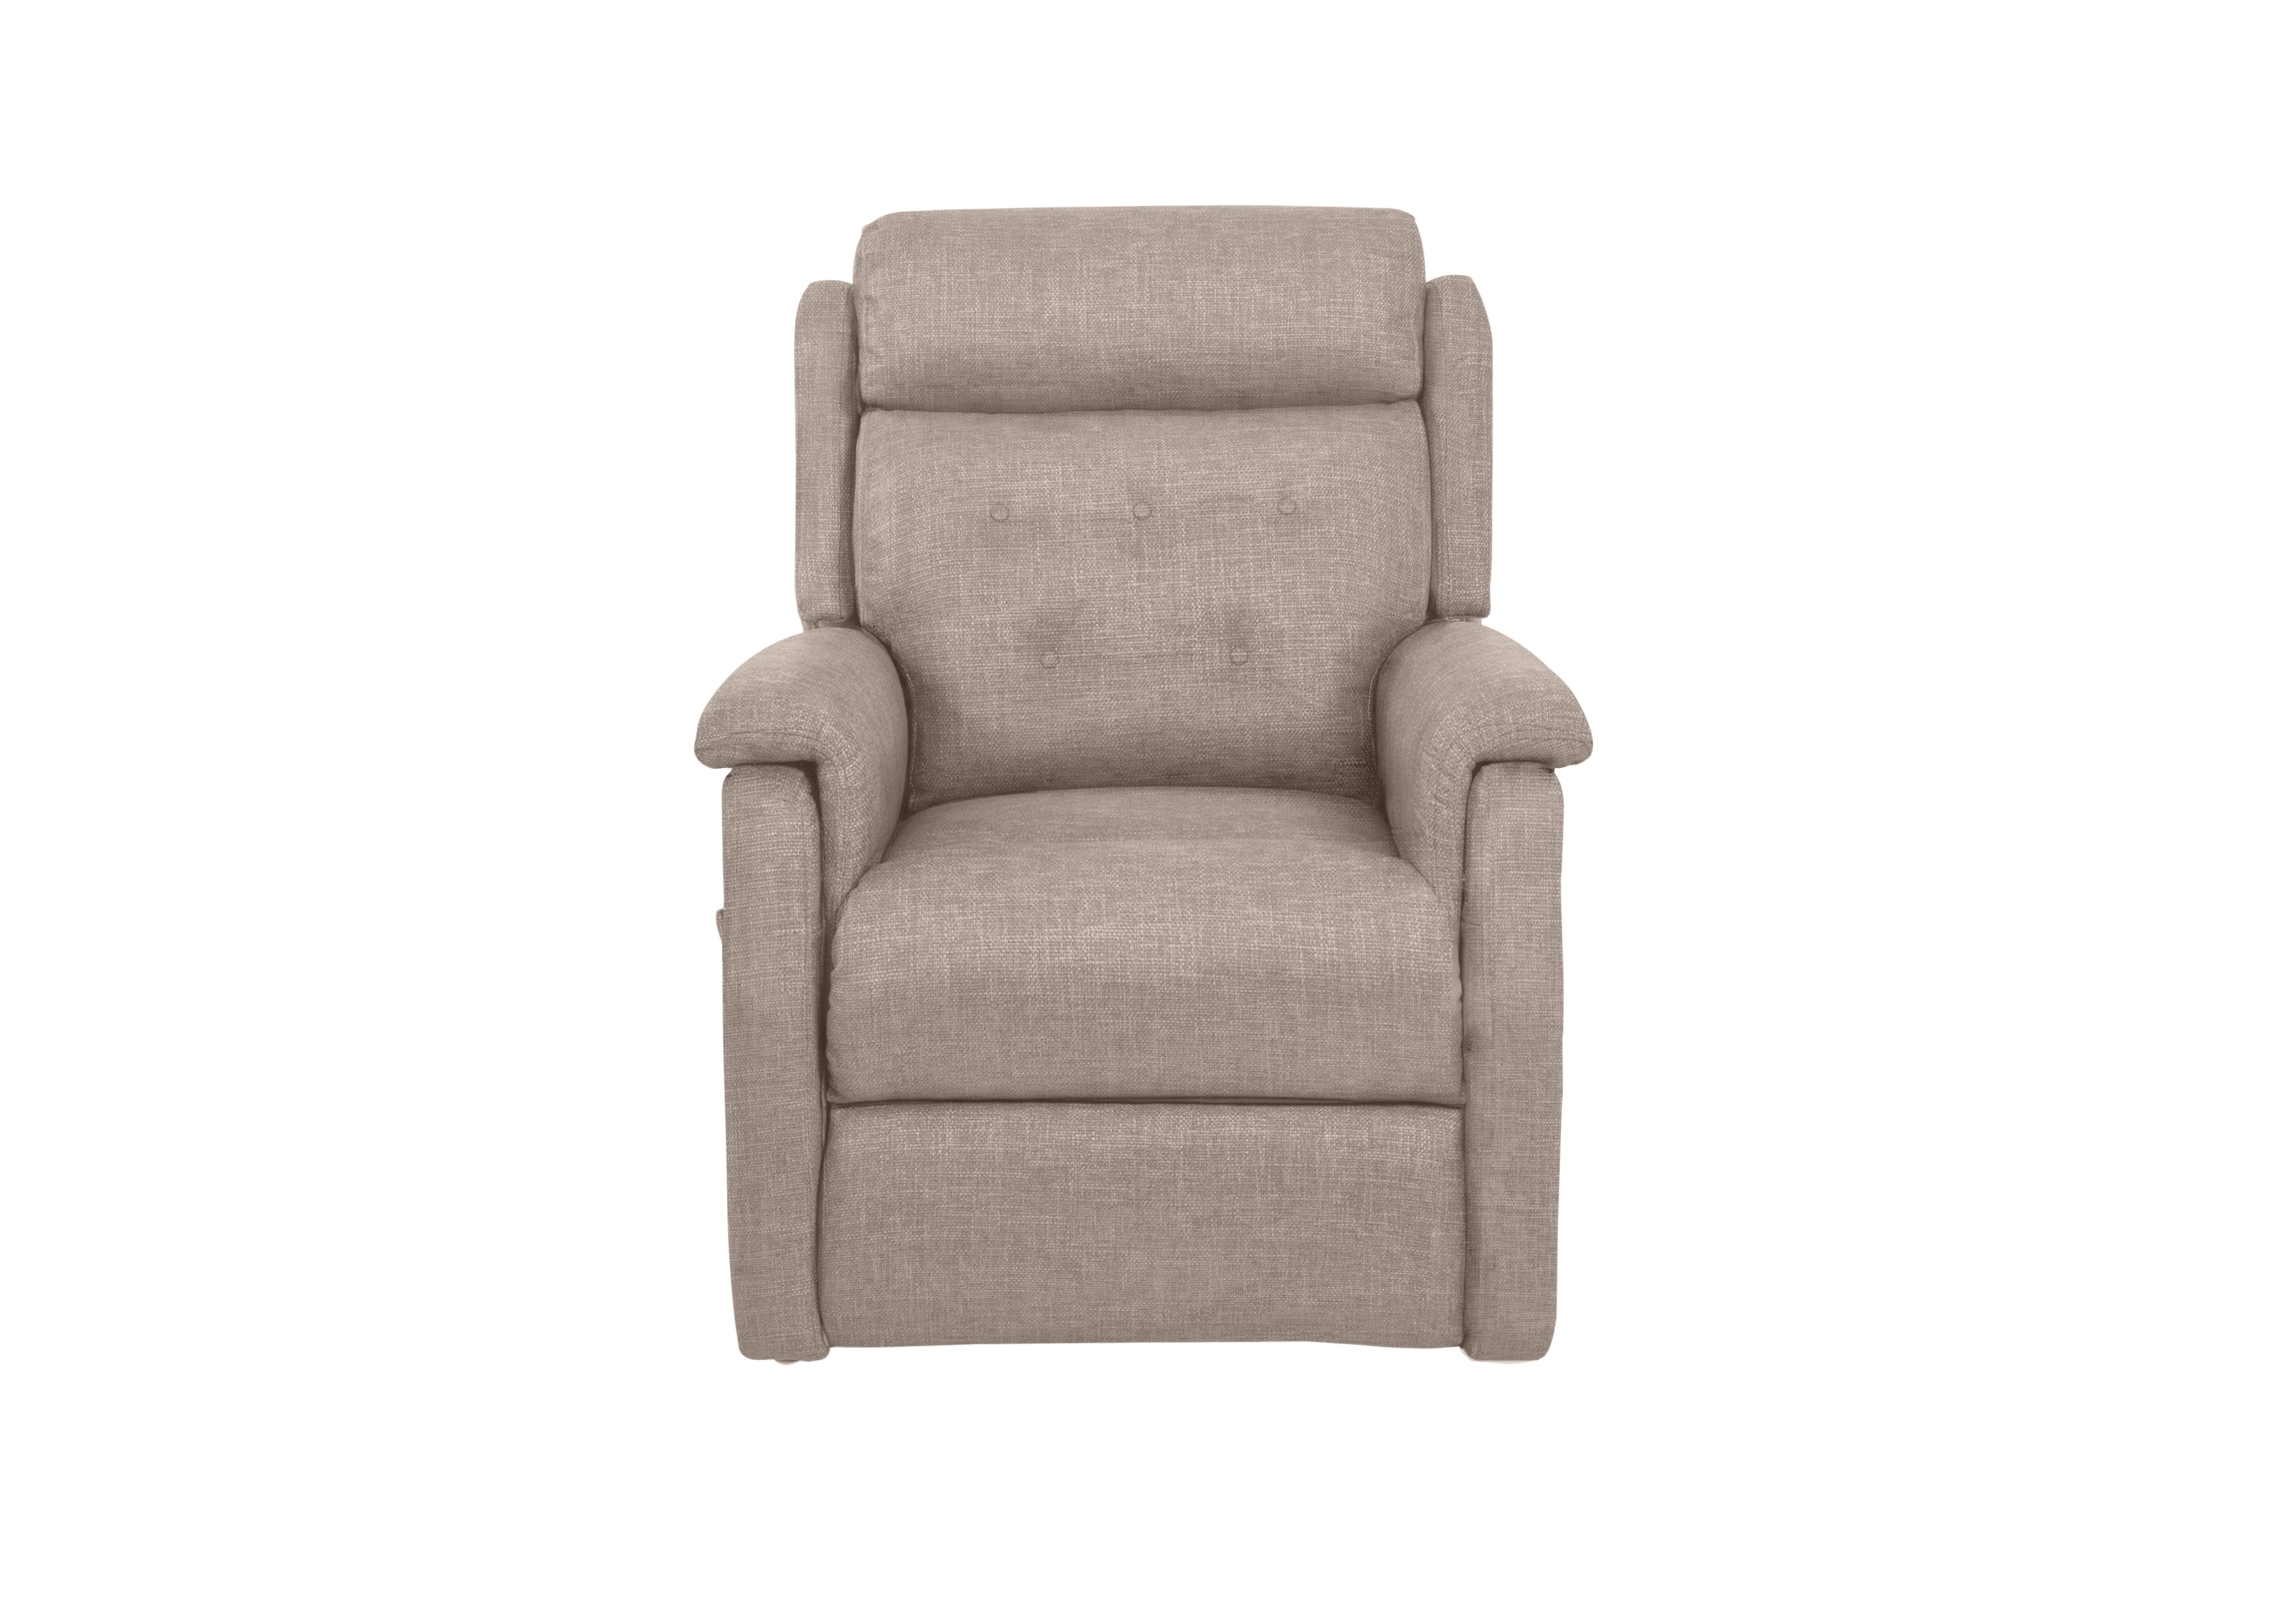 My Chair Scott Fabric Lift and Rise Chair in 14445 Khaki Anivia 04 on Furniture Village